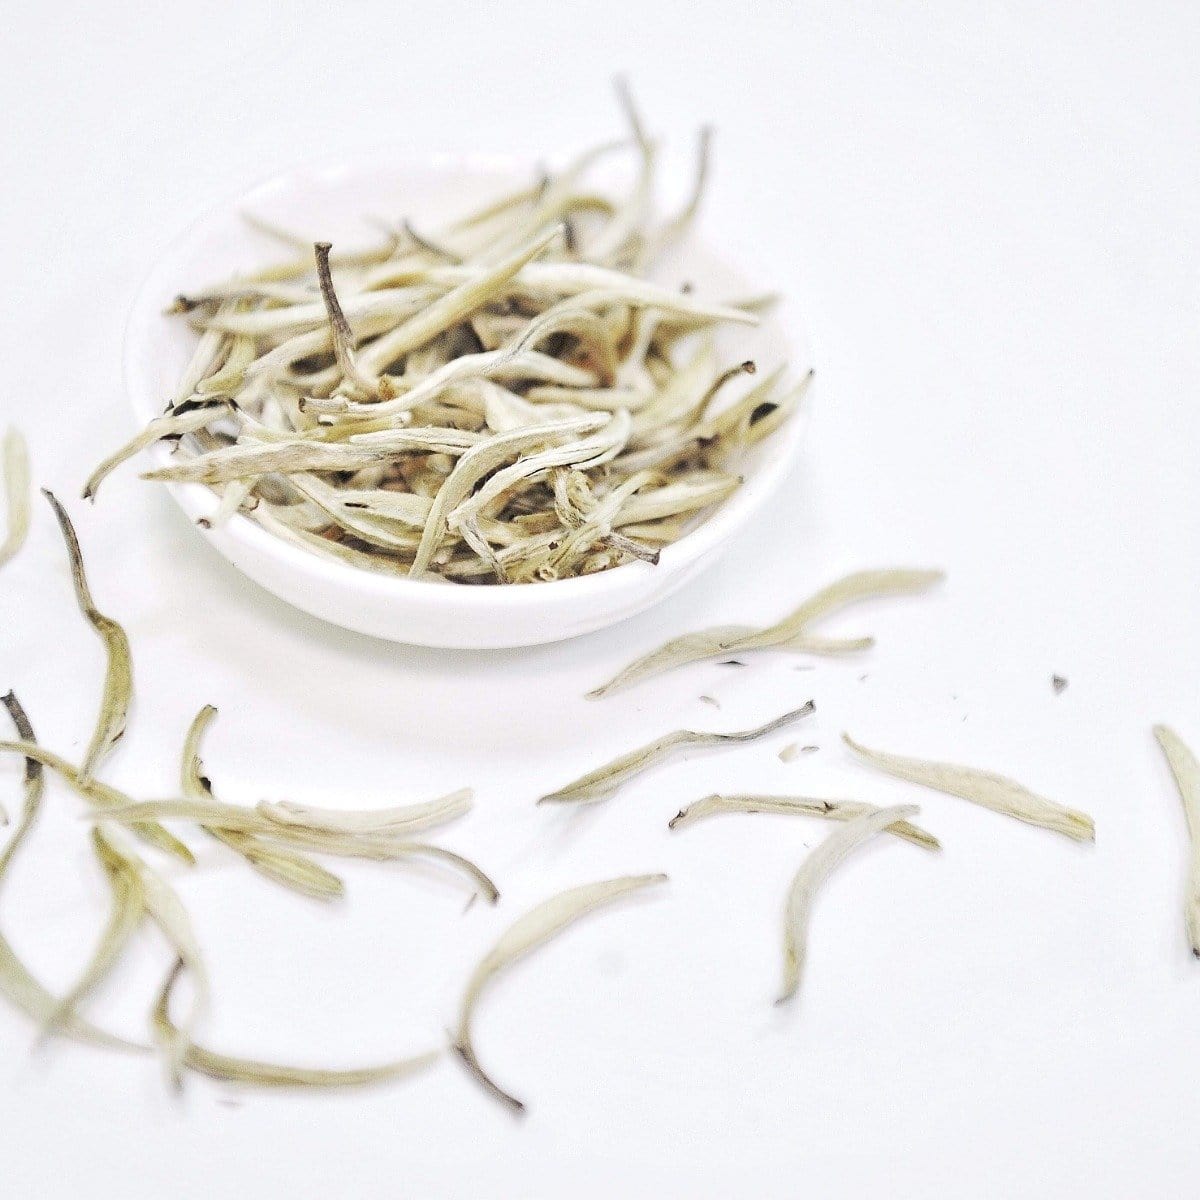 A small white bowl filled with Silver Moon White Tea leaves from Club Magic Hour is placed on a clean, white surface. Several thin, elongated leaves are scattered around the bowl, creating a minimalist and clean visual. The pale color of the Silver Moon White Tea adds to the serene aesthetic.